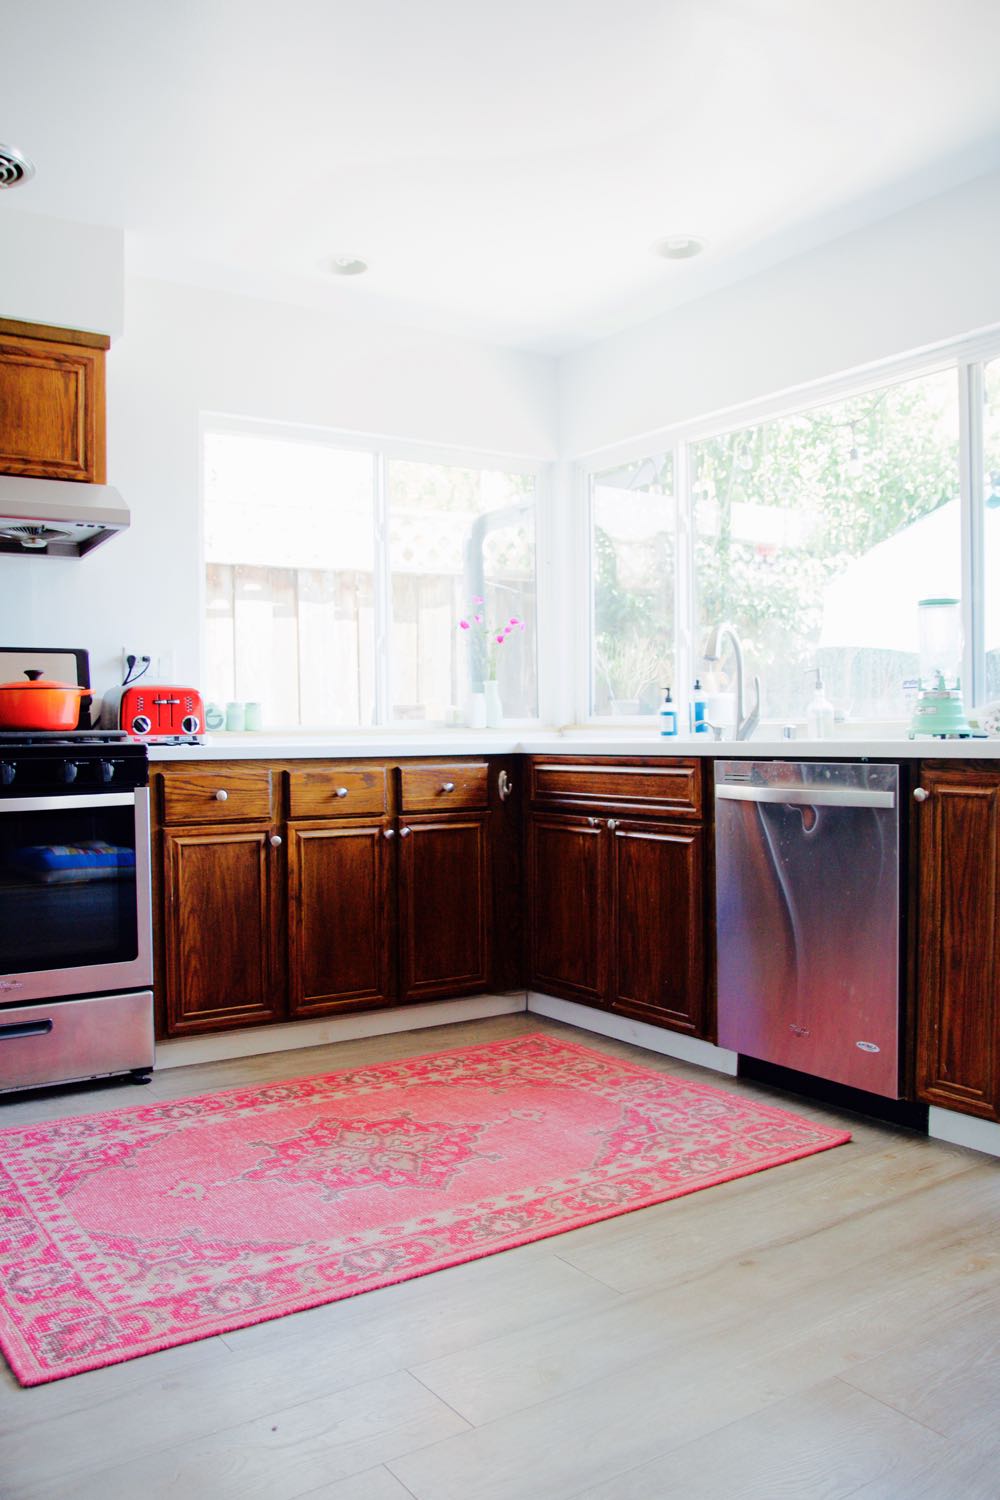 pink moroccan style rug in the kitchen